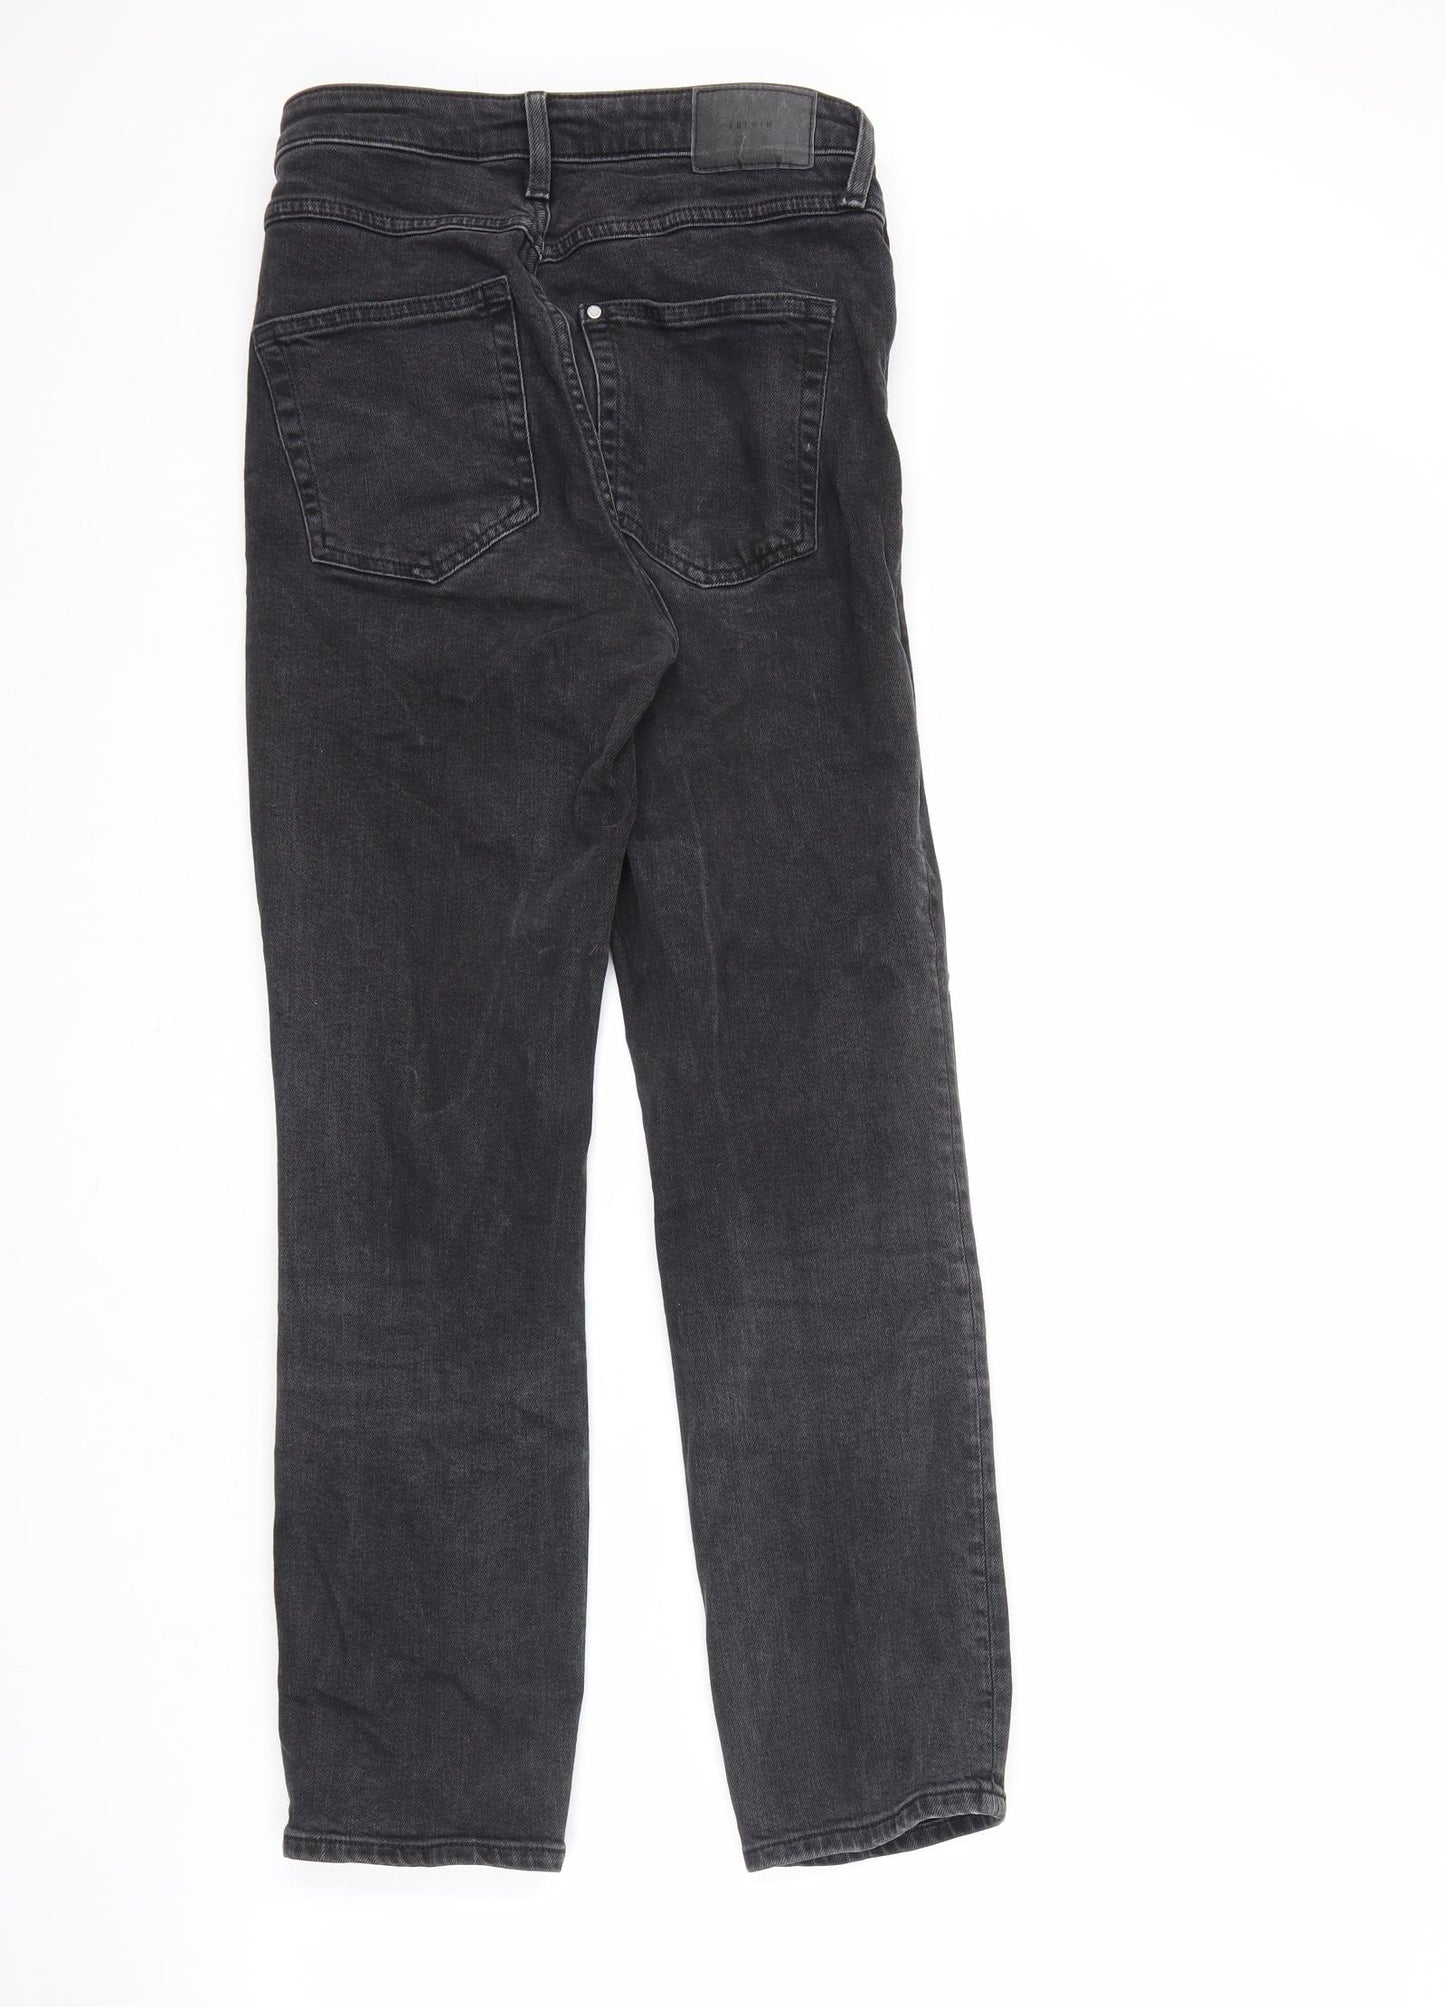 H&M Womens Black Cotton Straight Jeans Size 8 L27 in Regular Zip